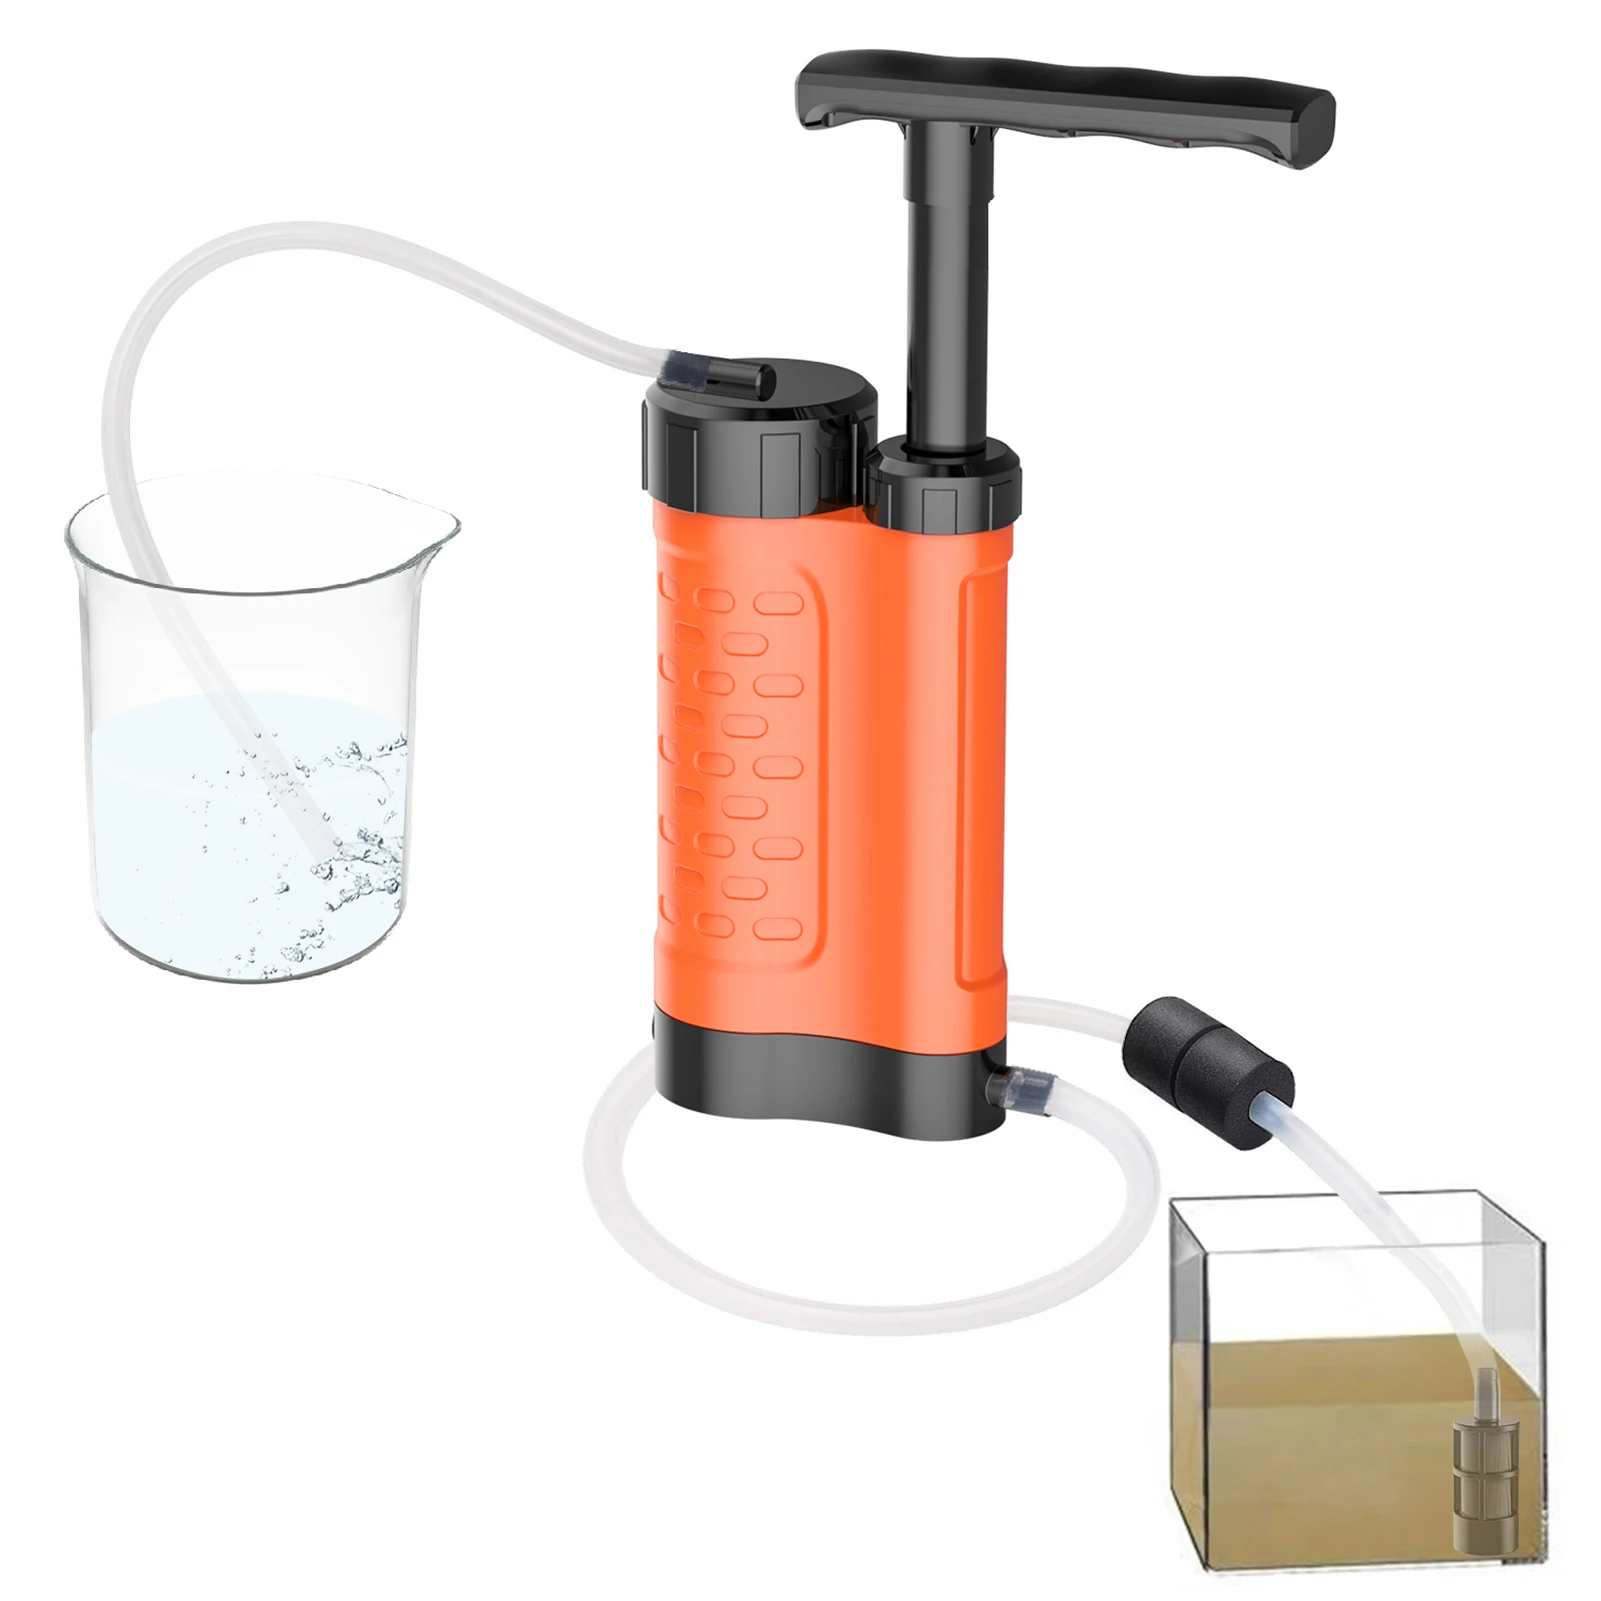 

Outdoor Water Purifier Camping Hiking Emergency Life Survival Portable Purifiertravel Wild Drink Ultrafiltration Water Filter